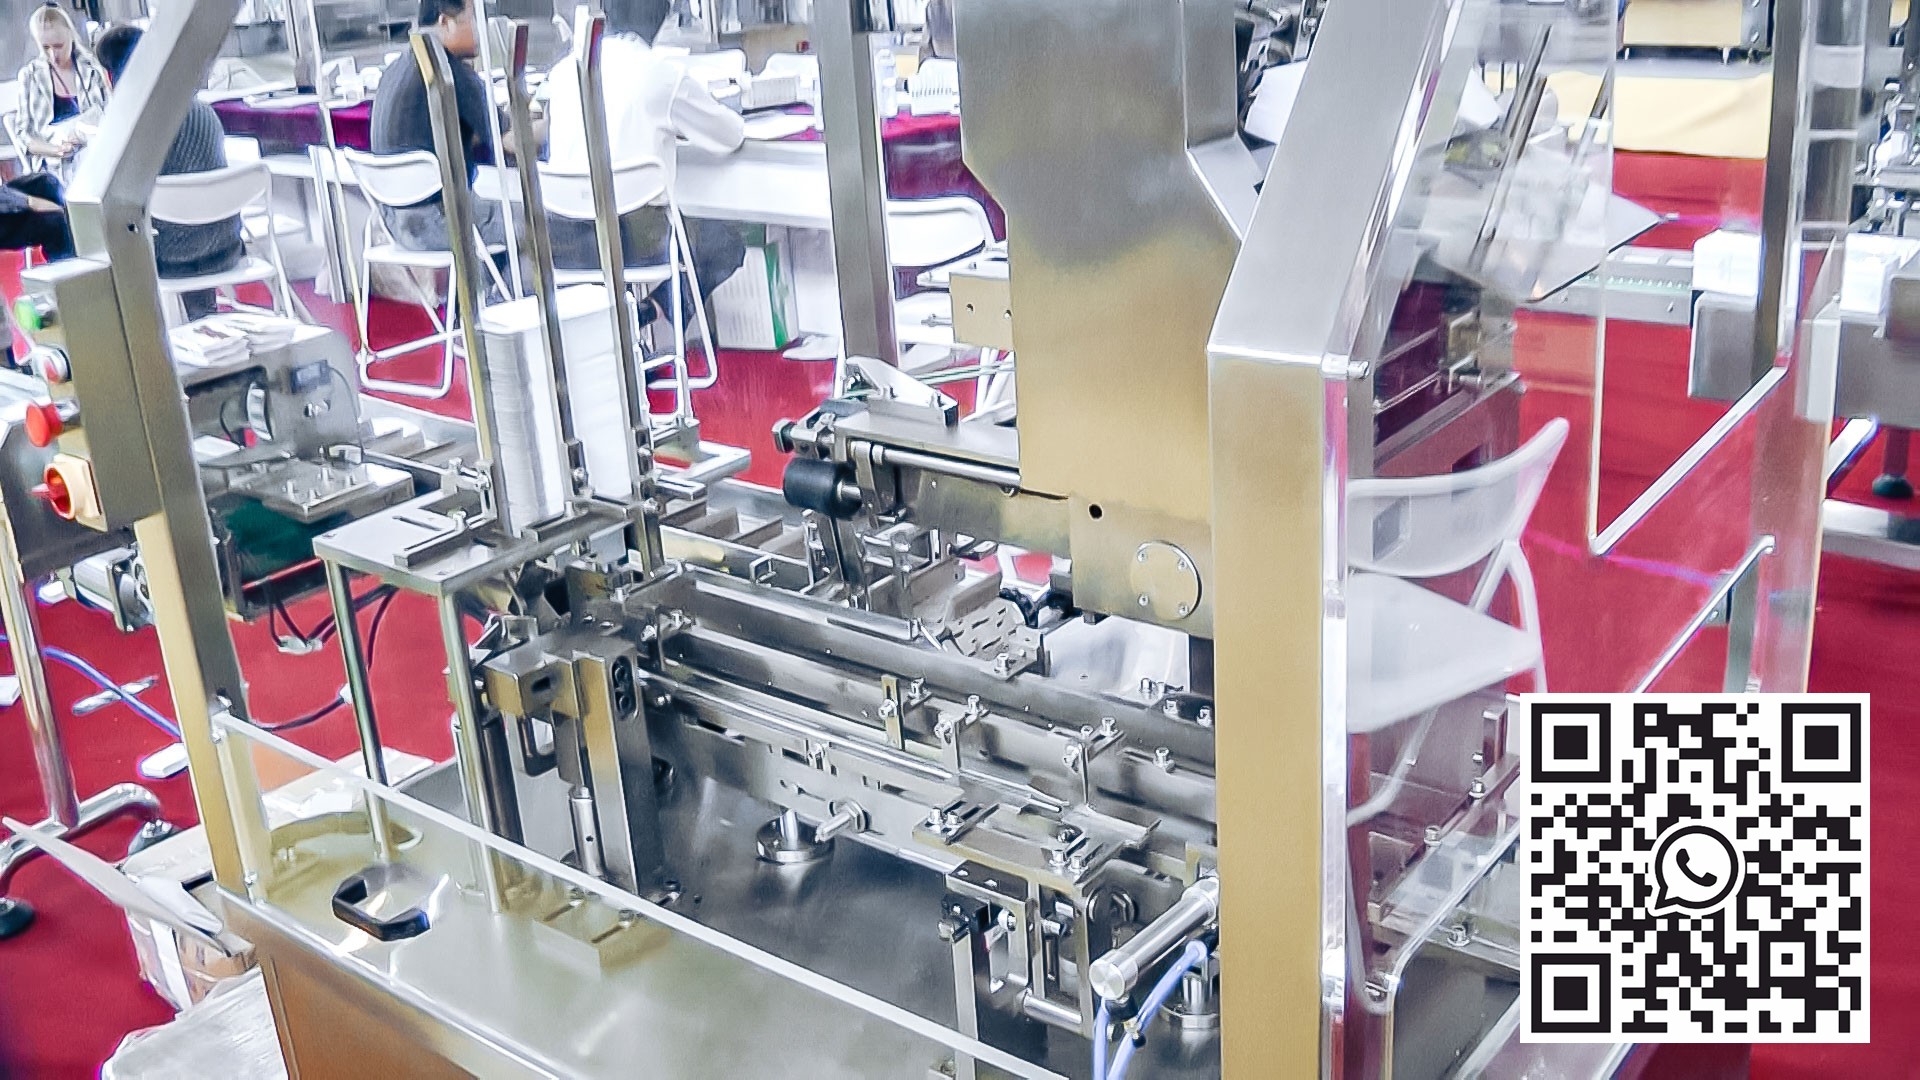 Automatic equipment for packaging in blister cartons with tablets in pharmaceutical production